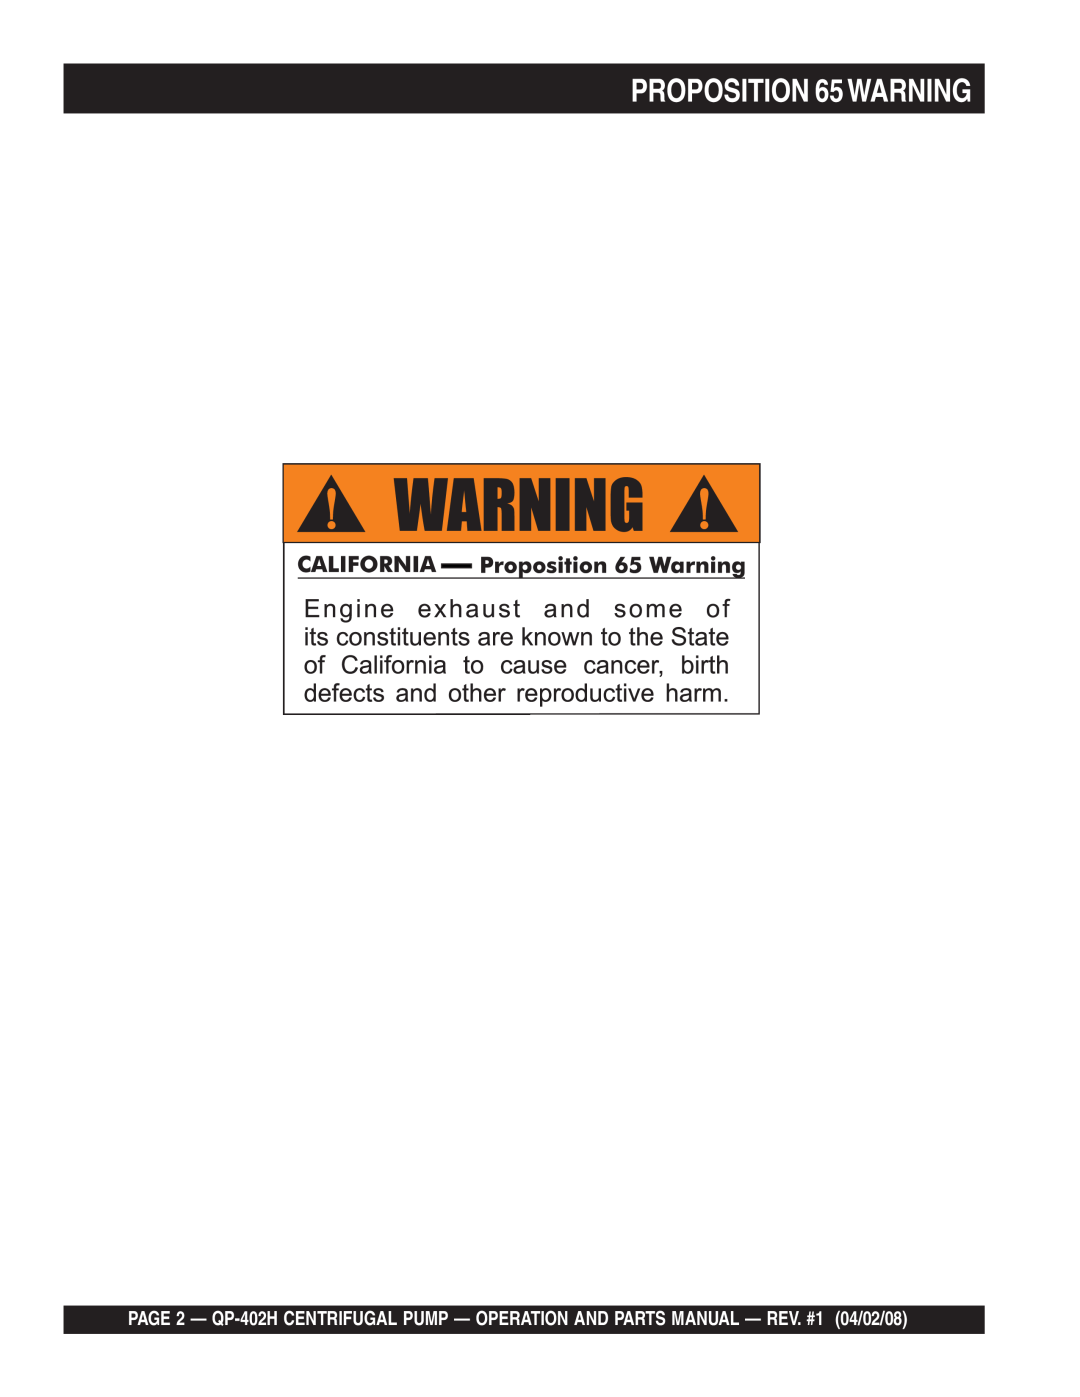 Multiquip qp-402h manual PROPOSITION 65WARNING 